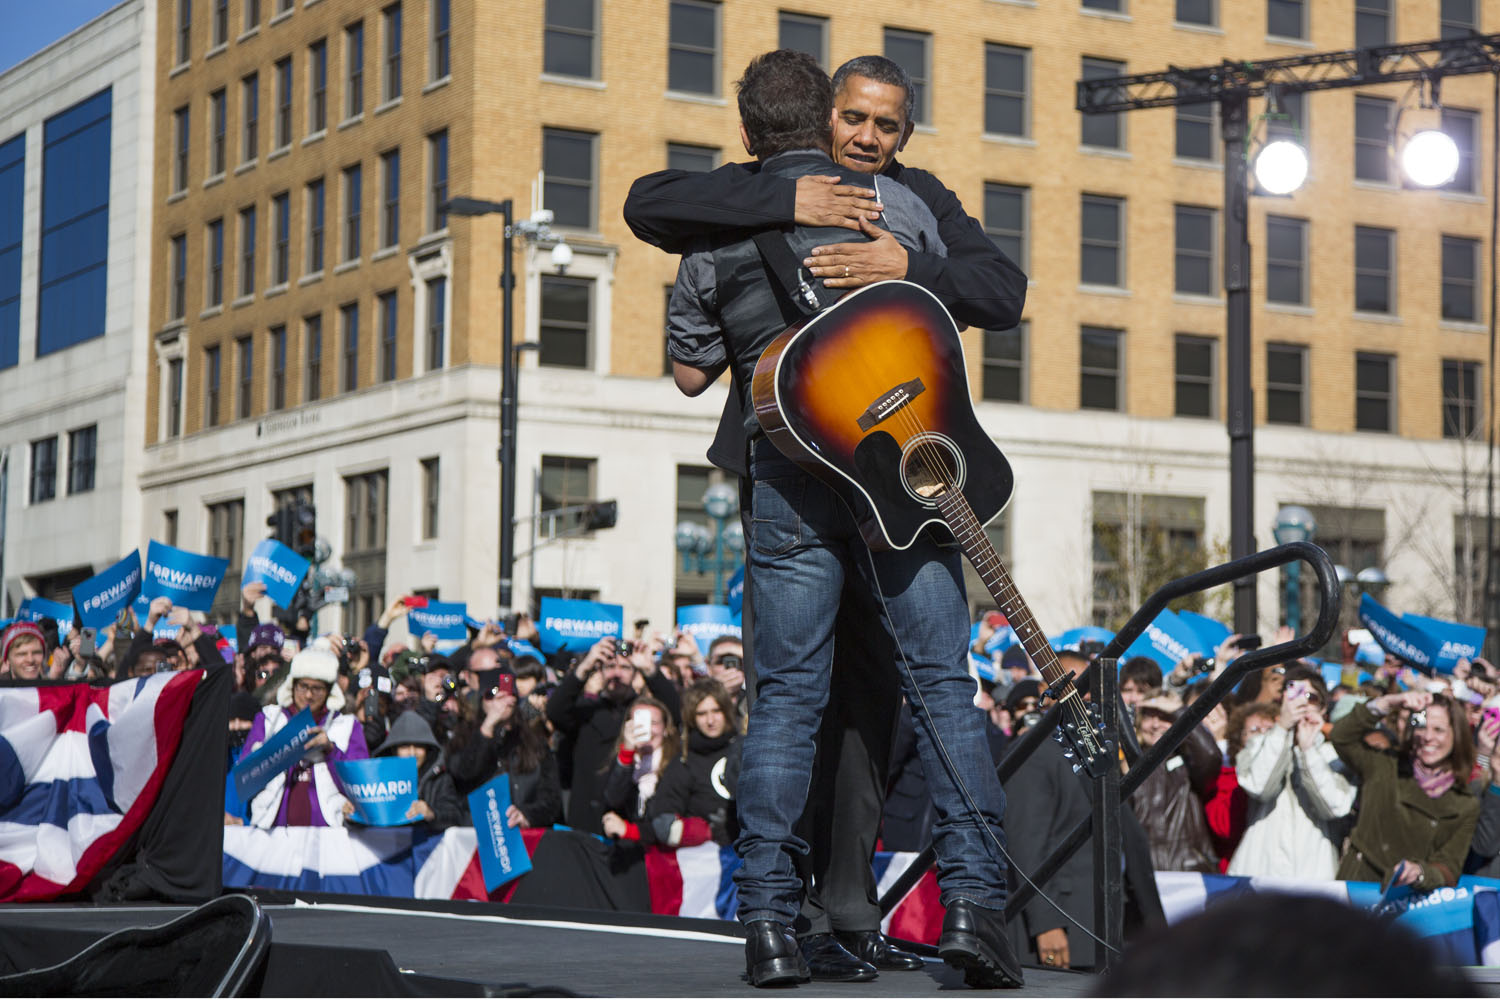 Image: Nov. 5, 2012. Bruce Springsteen is greeted by President Obama after performing at a campaign rally in Madison, Wis.